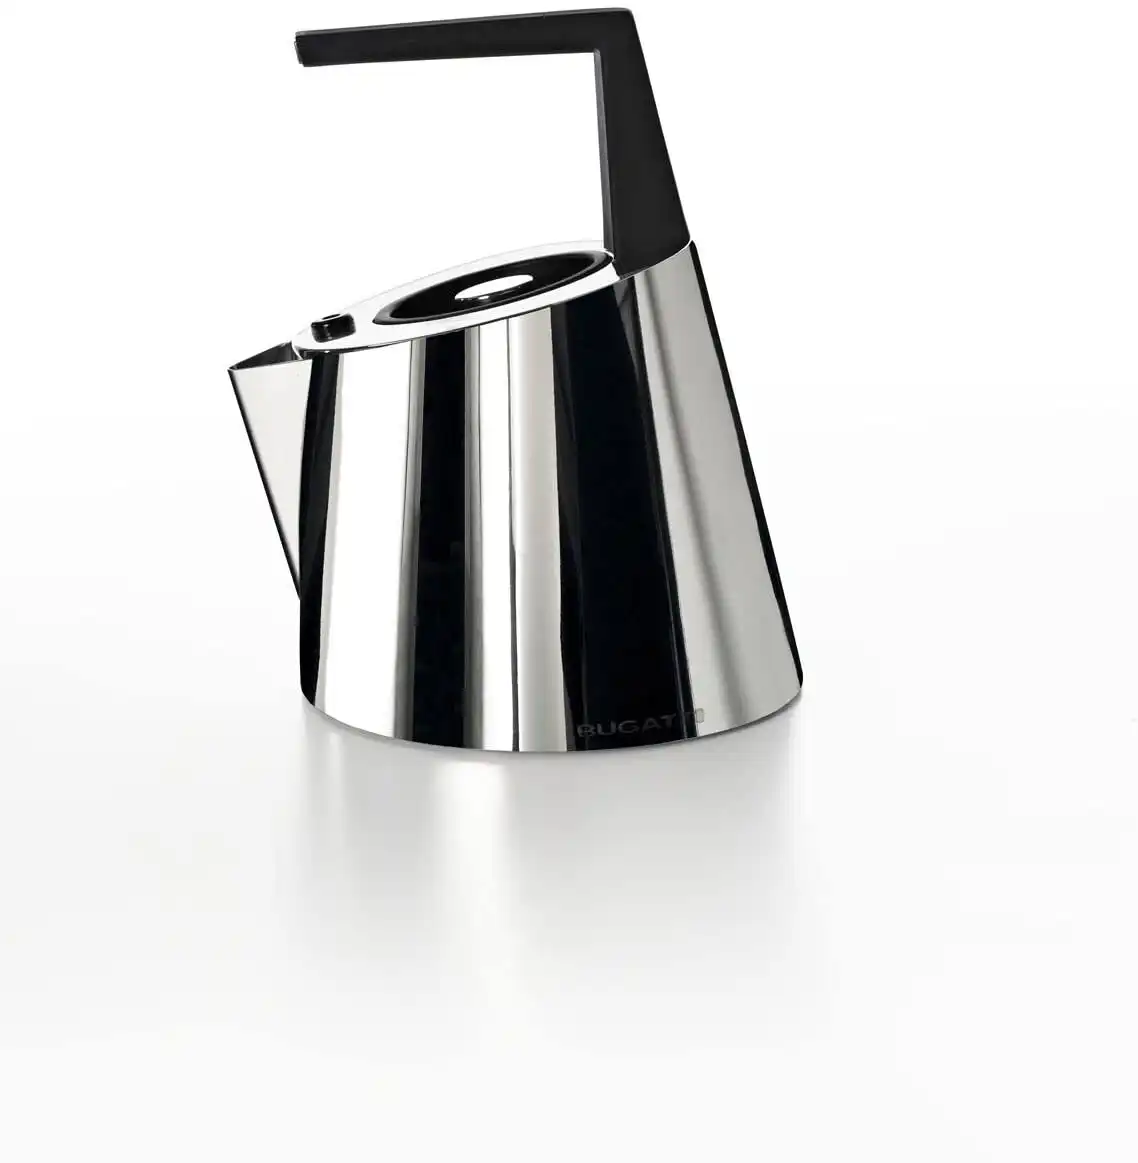 Bugatti Via Roma 1.4L Stainless Steel Whistling Stovetop Kettle